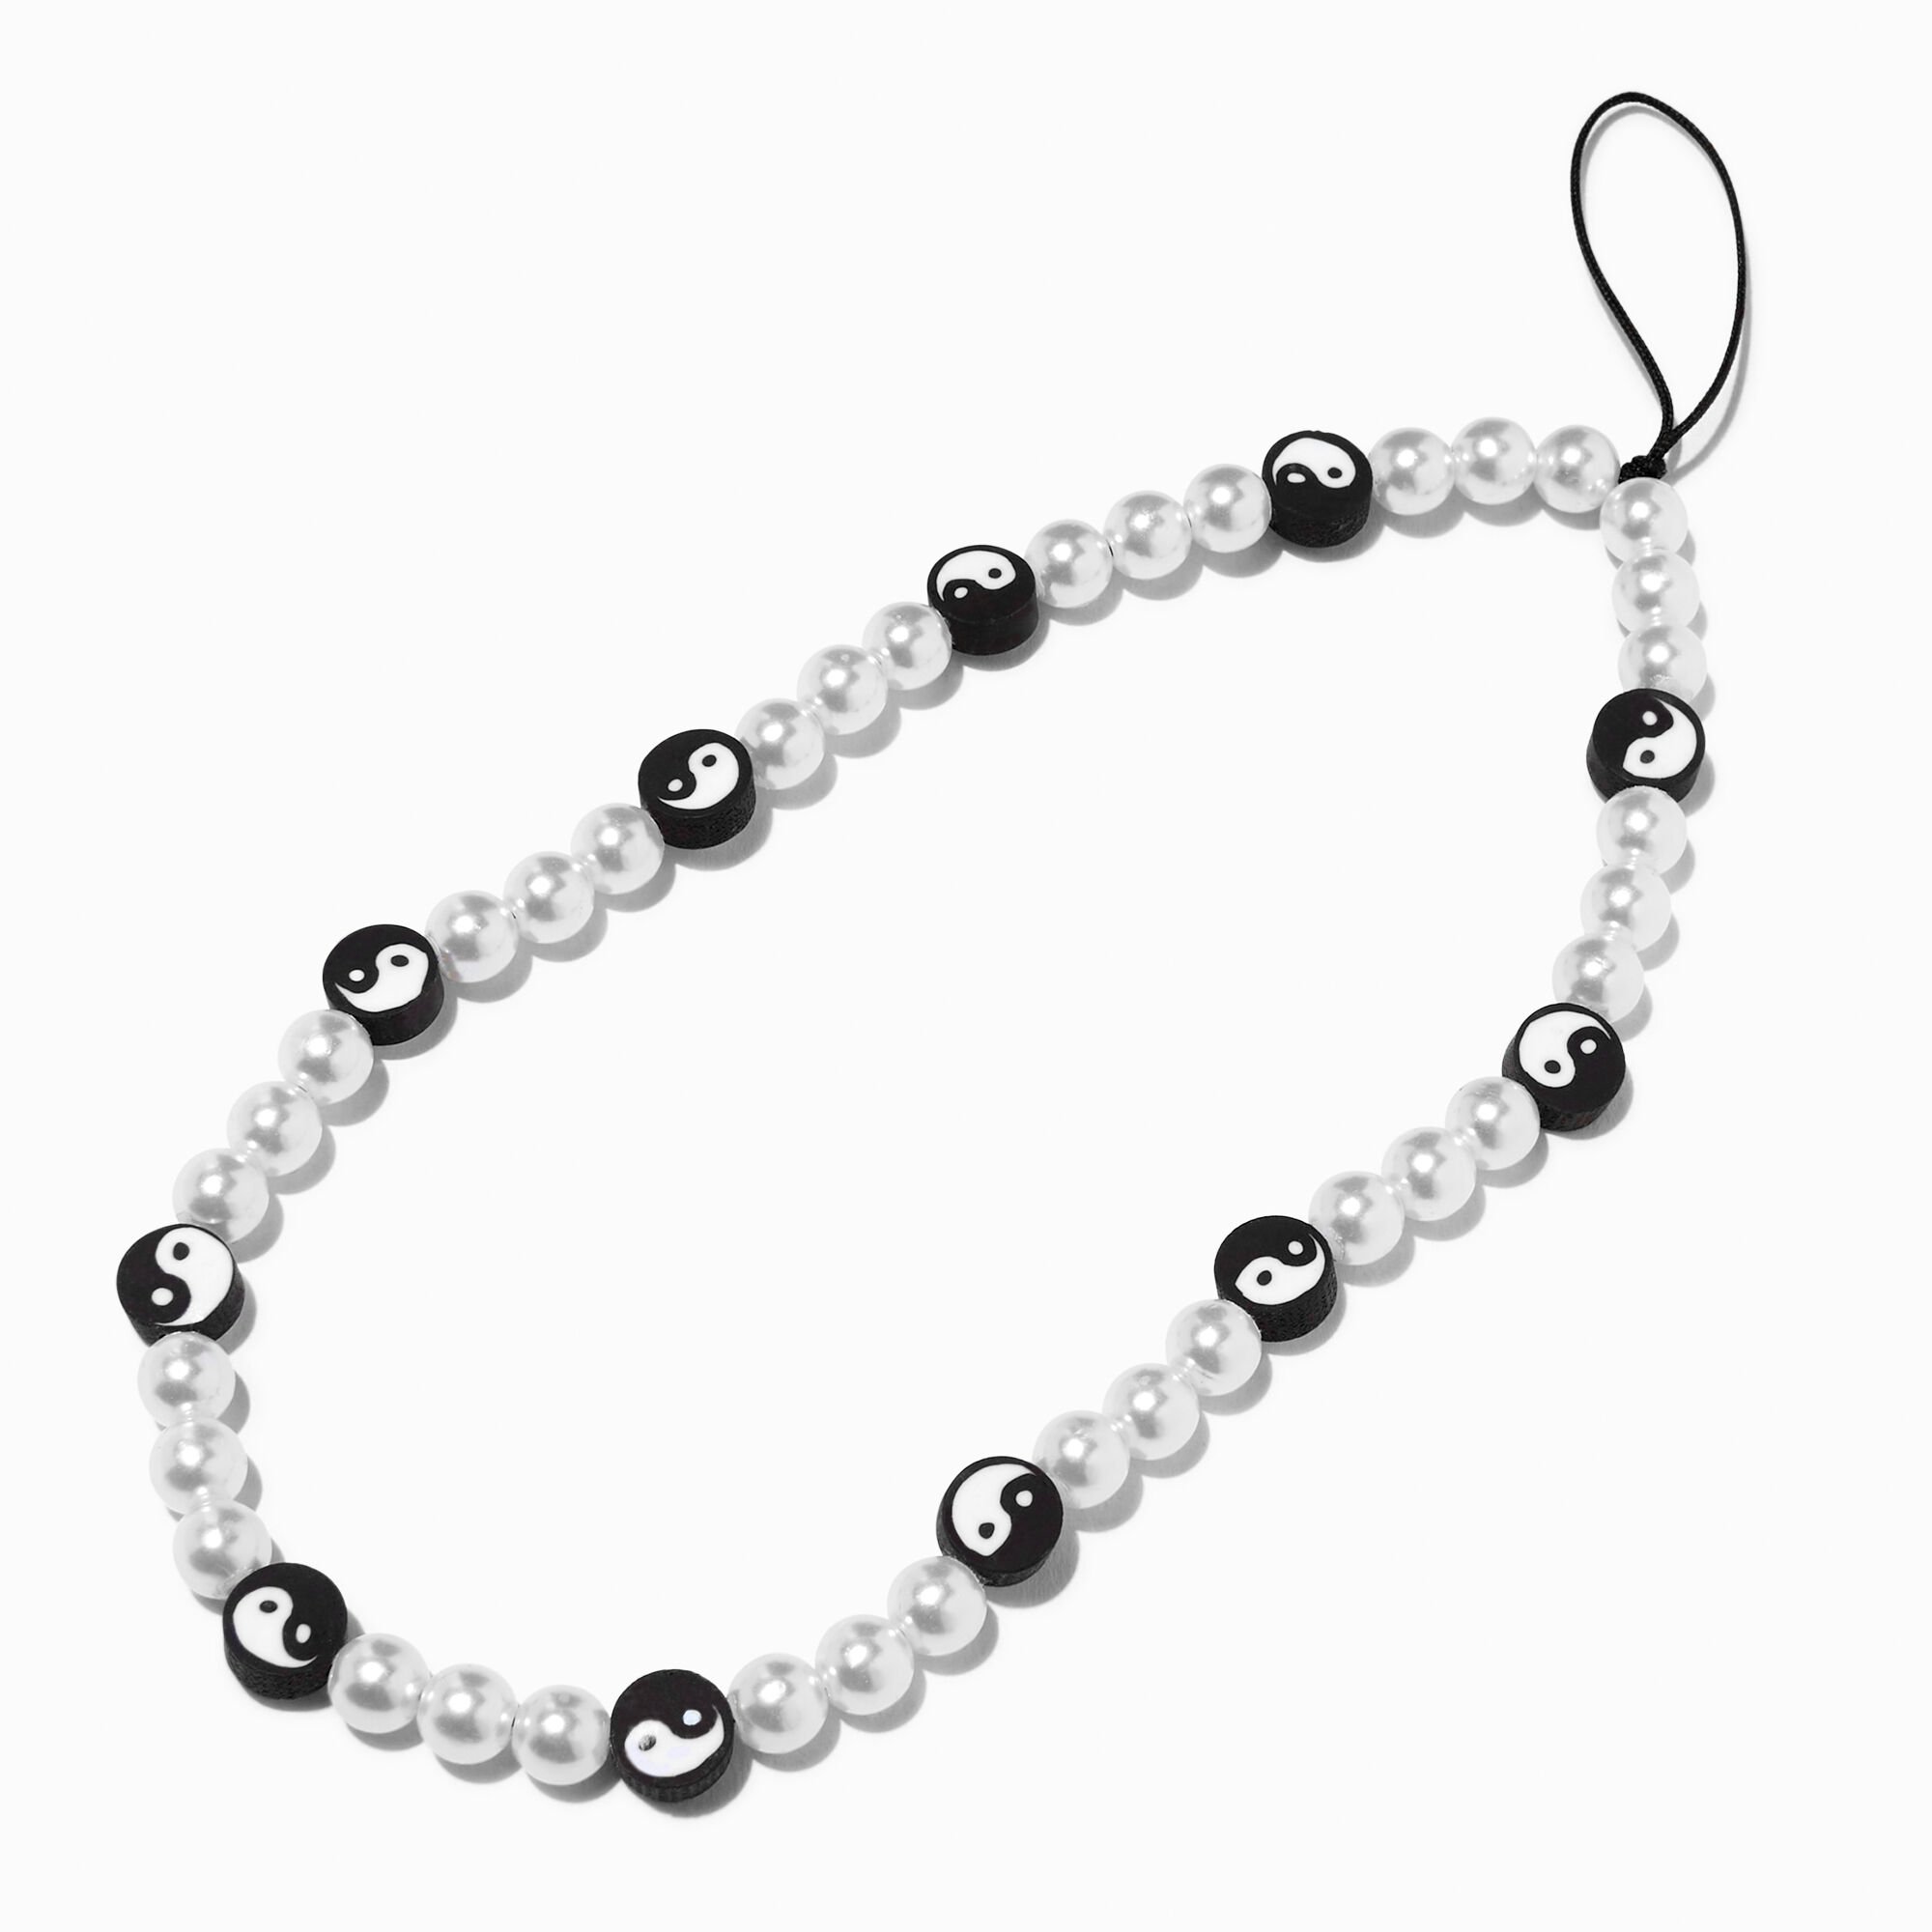 View Claires Yin Yang Beaded Phone Wrist Strap information